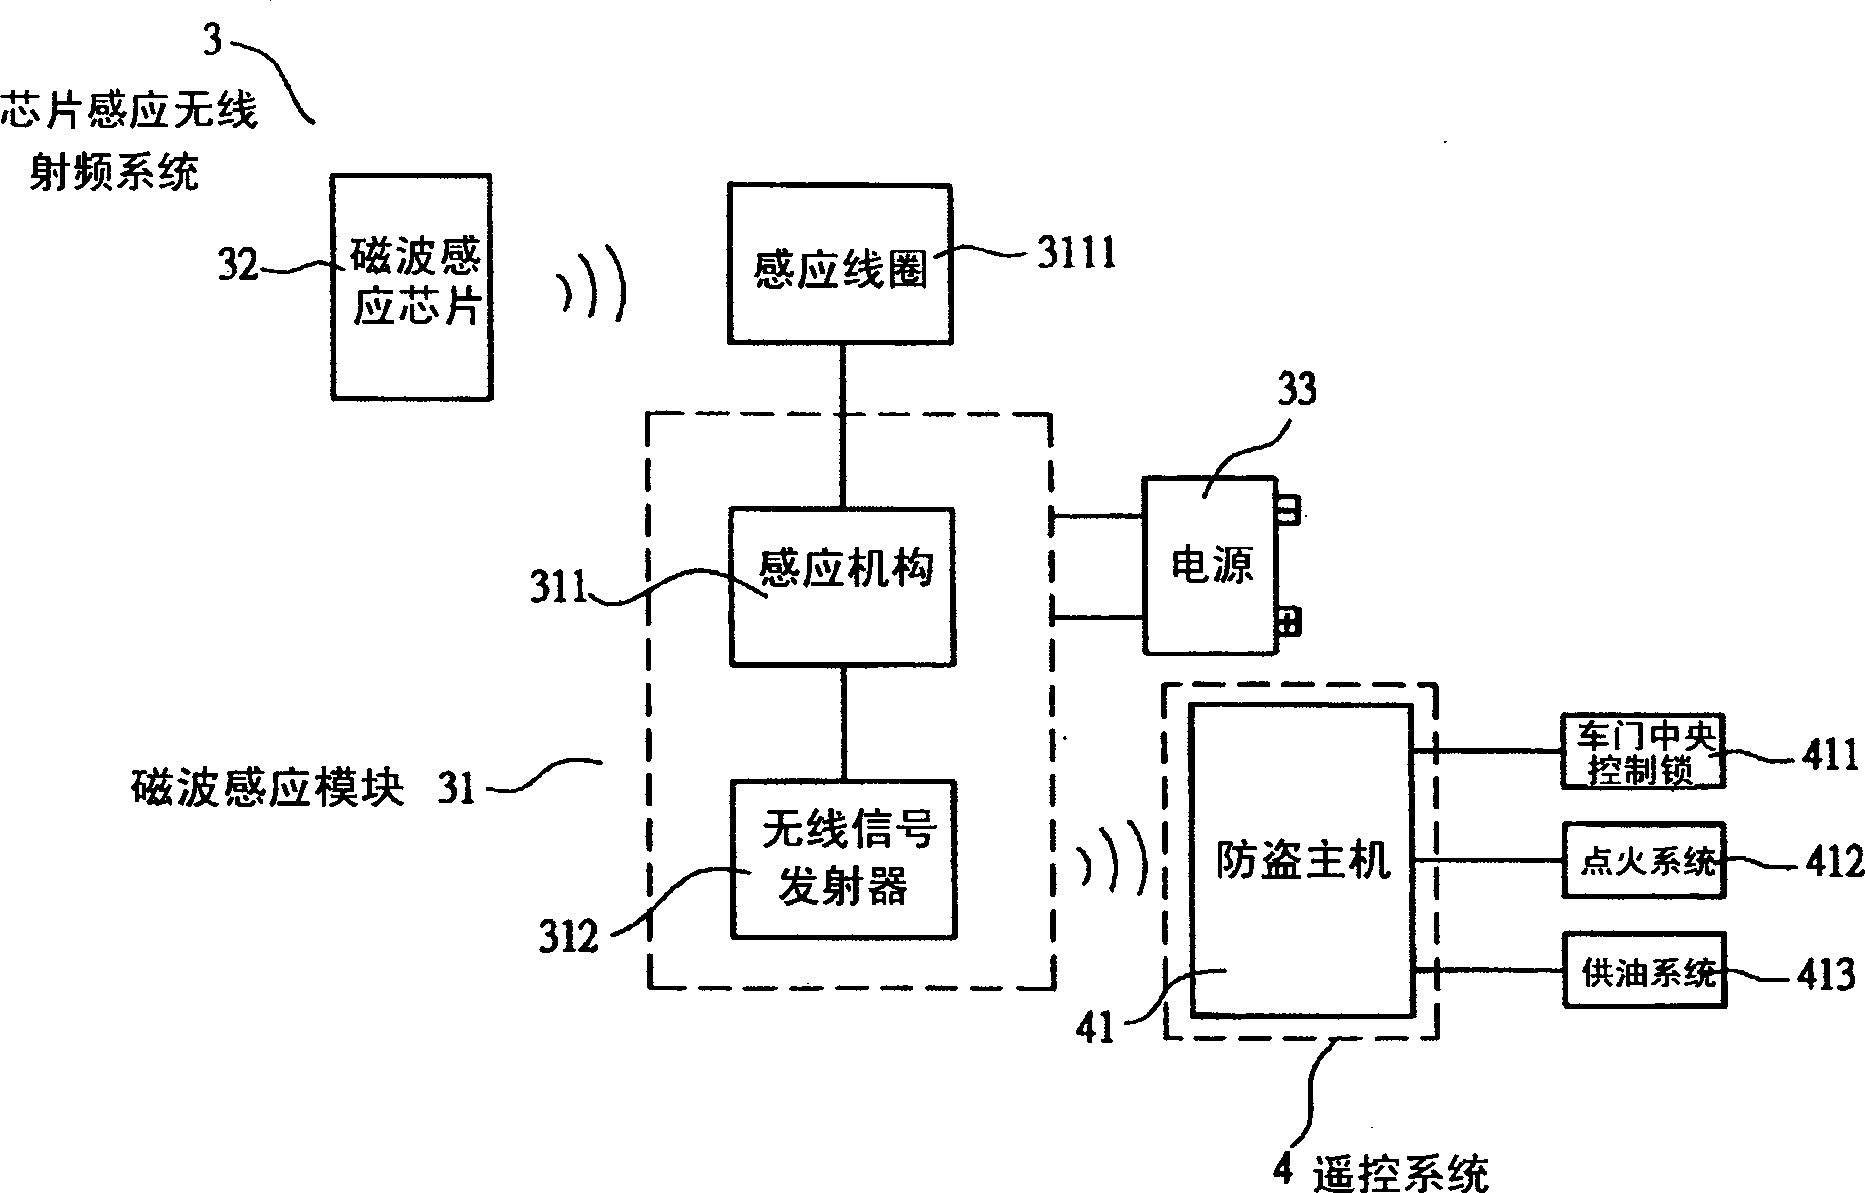 Operating and controlling method and equipment of sensing burglary protection system of vehicle